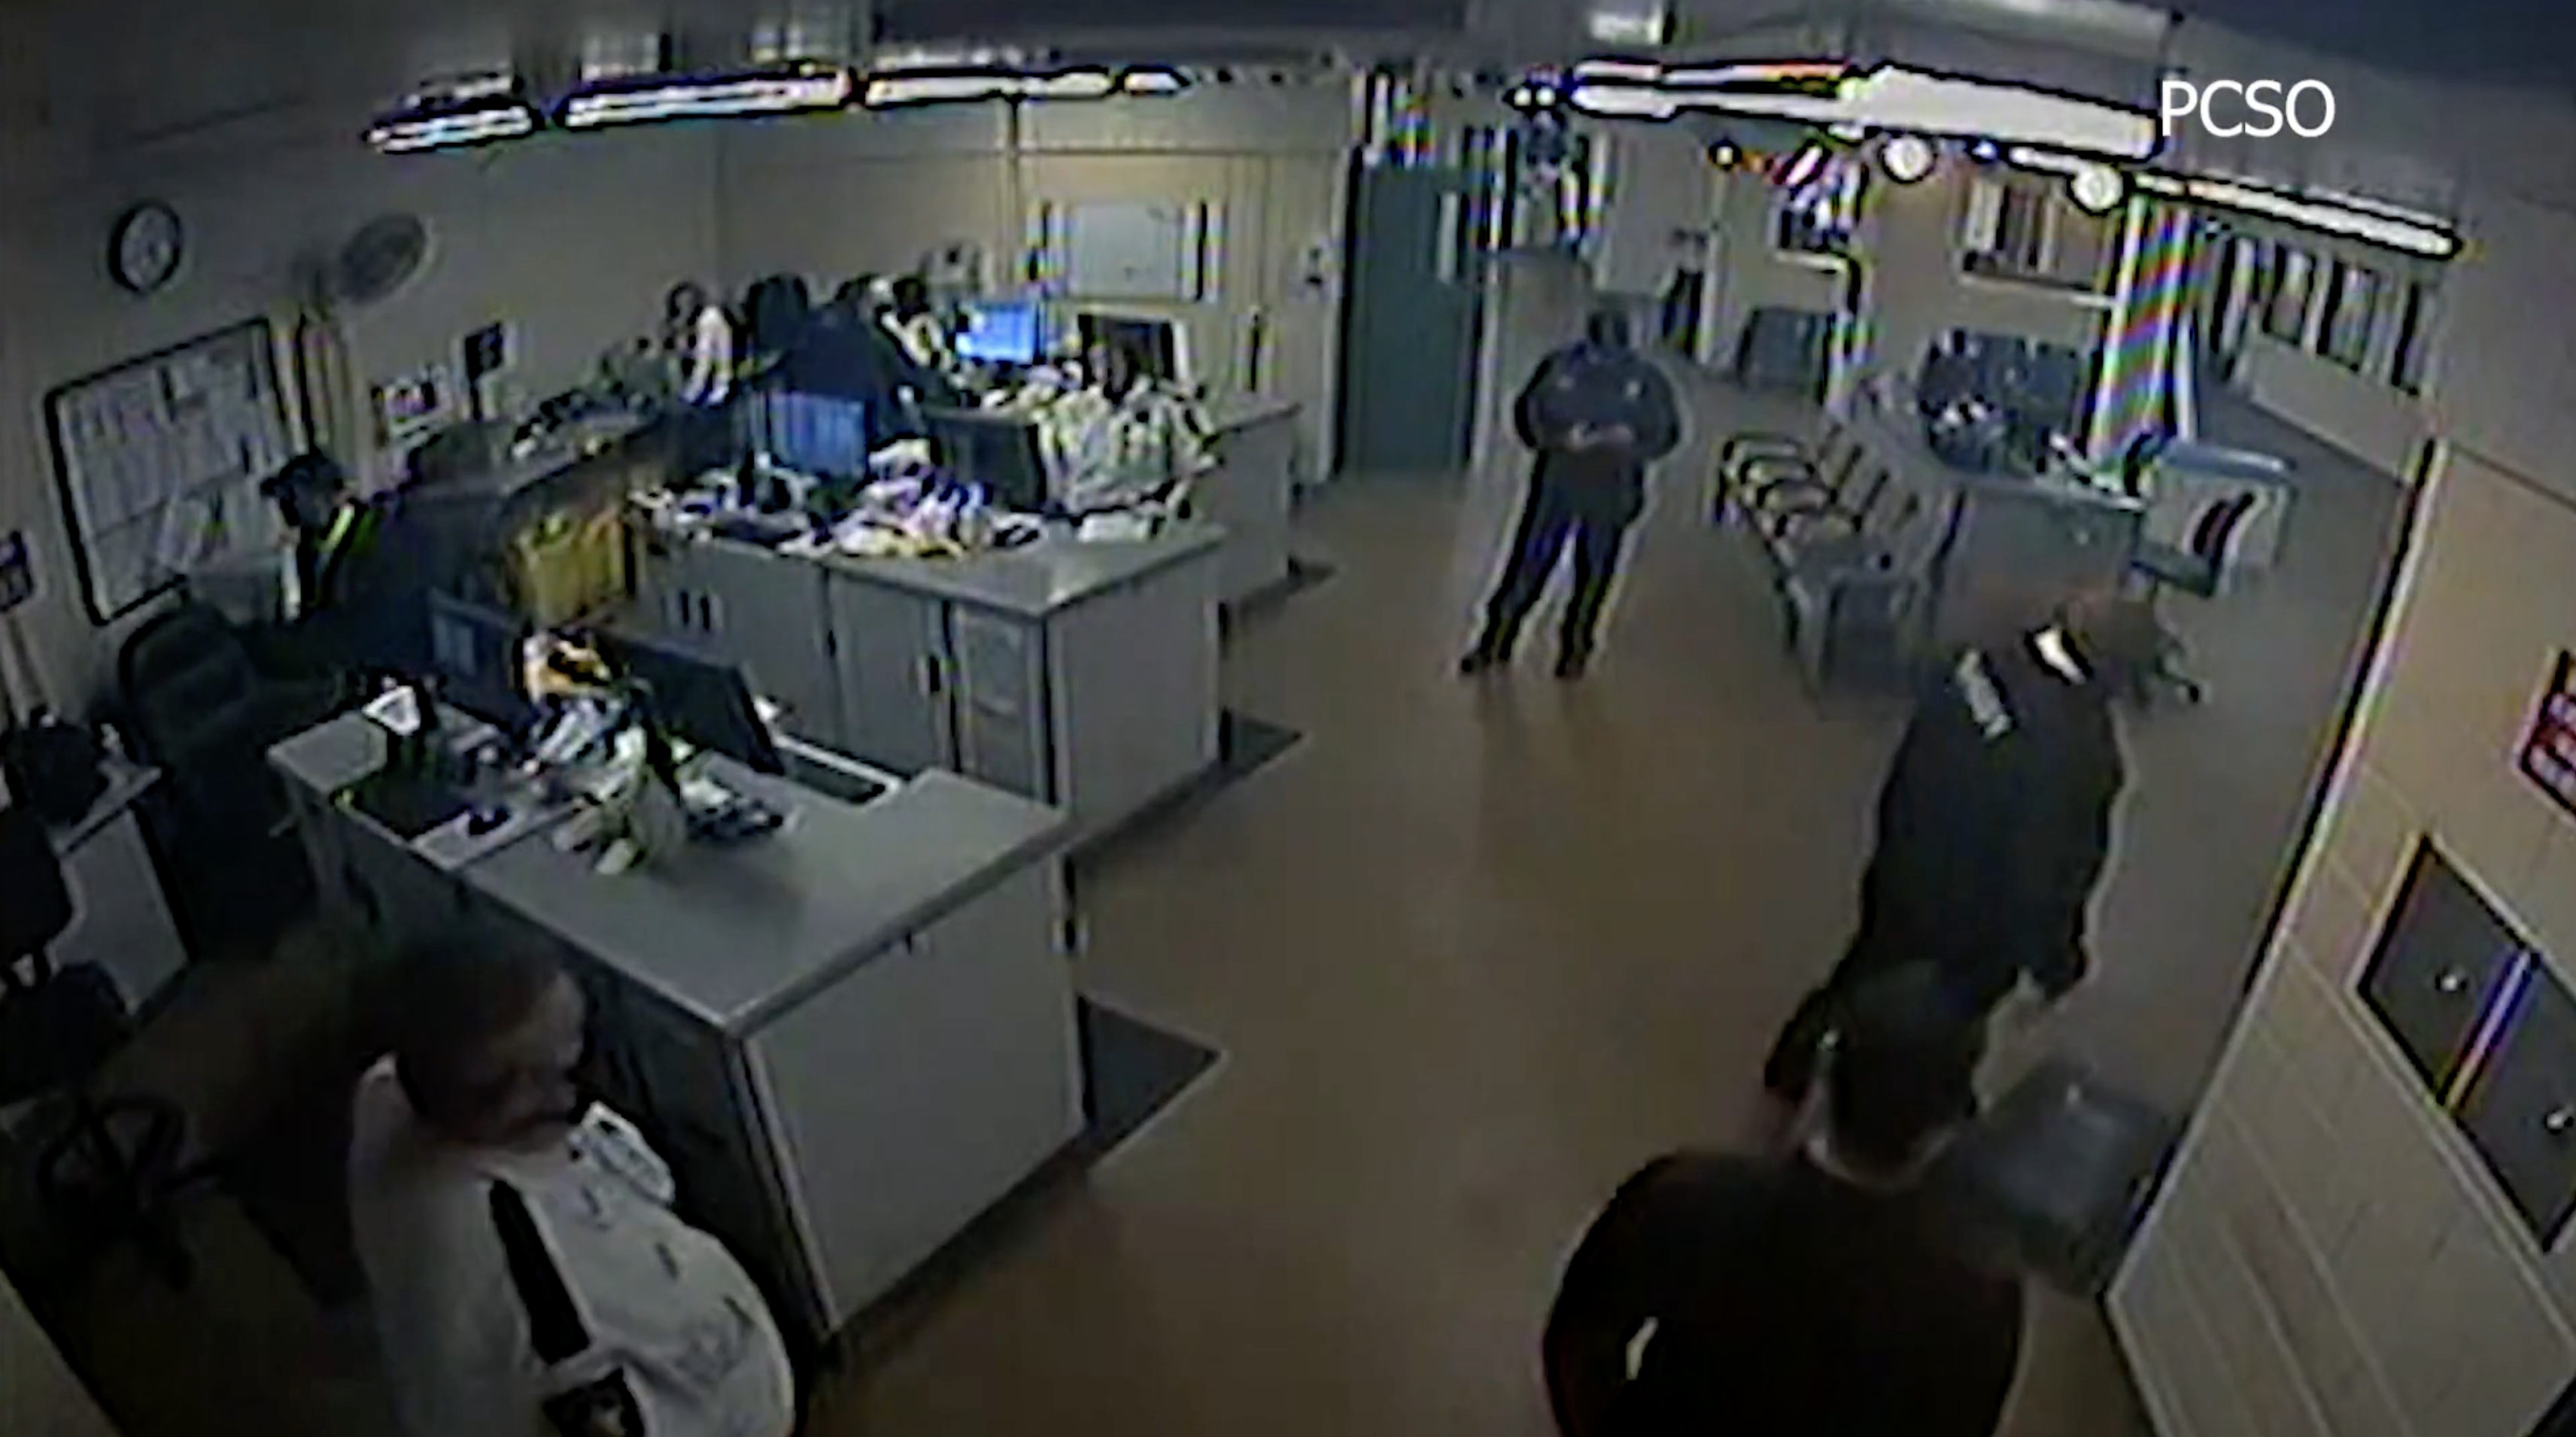 Video Surveillance from Booking at Pinellas County Sheriff's Office